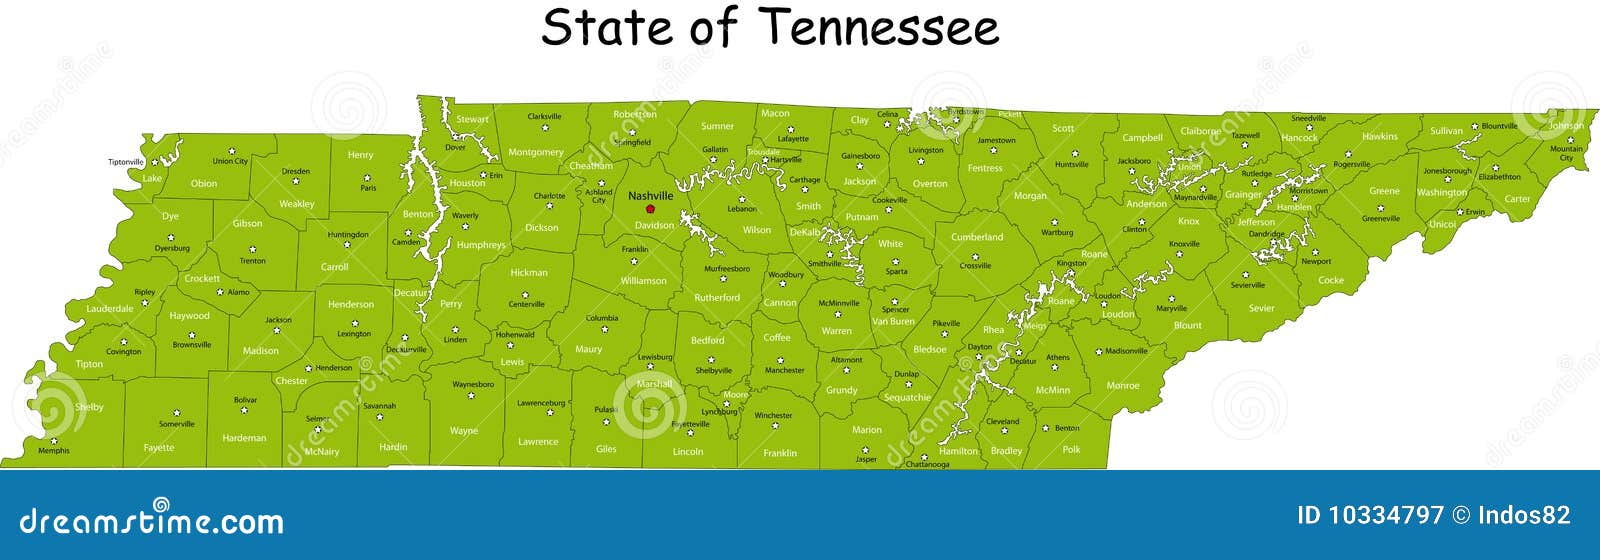 clipart map of tennessee - photo #32